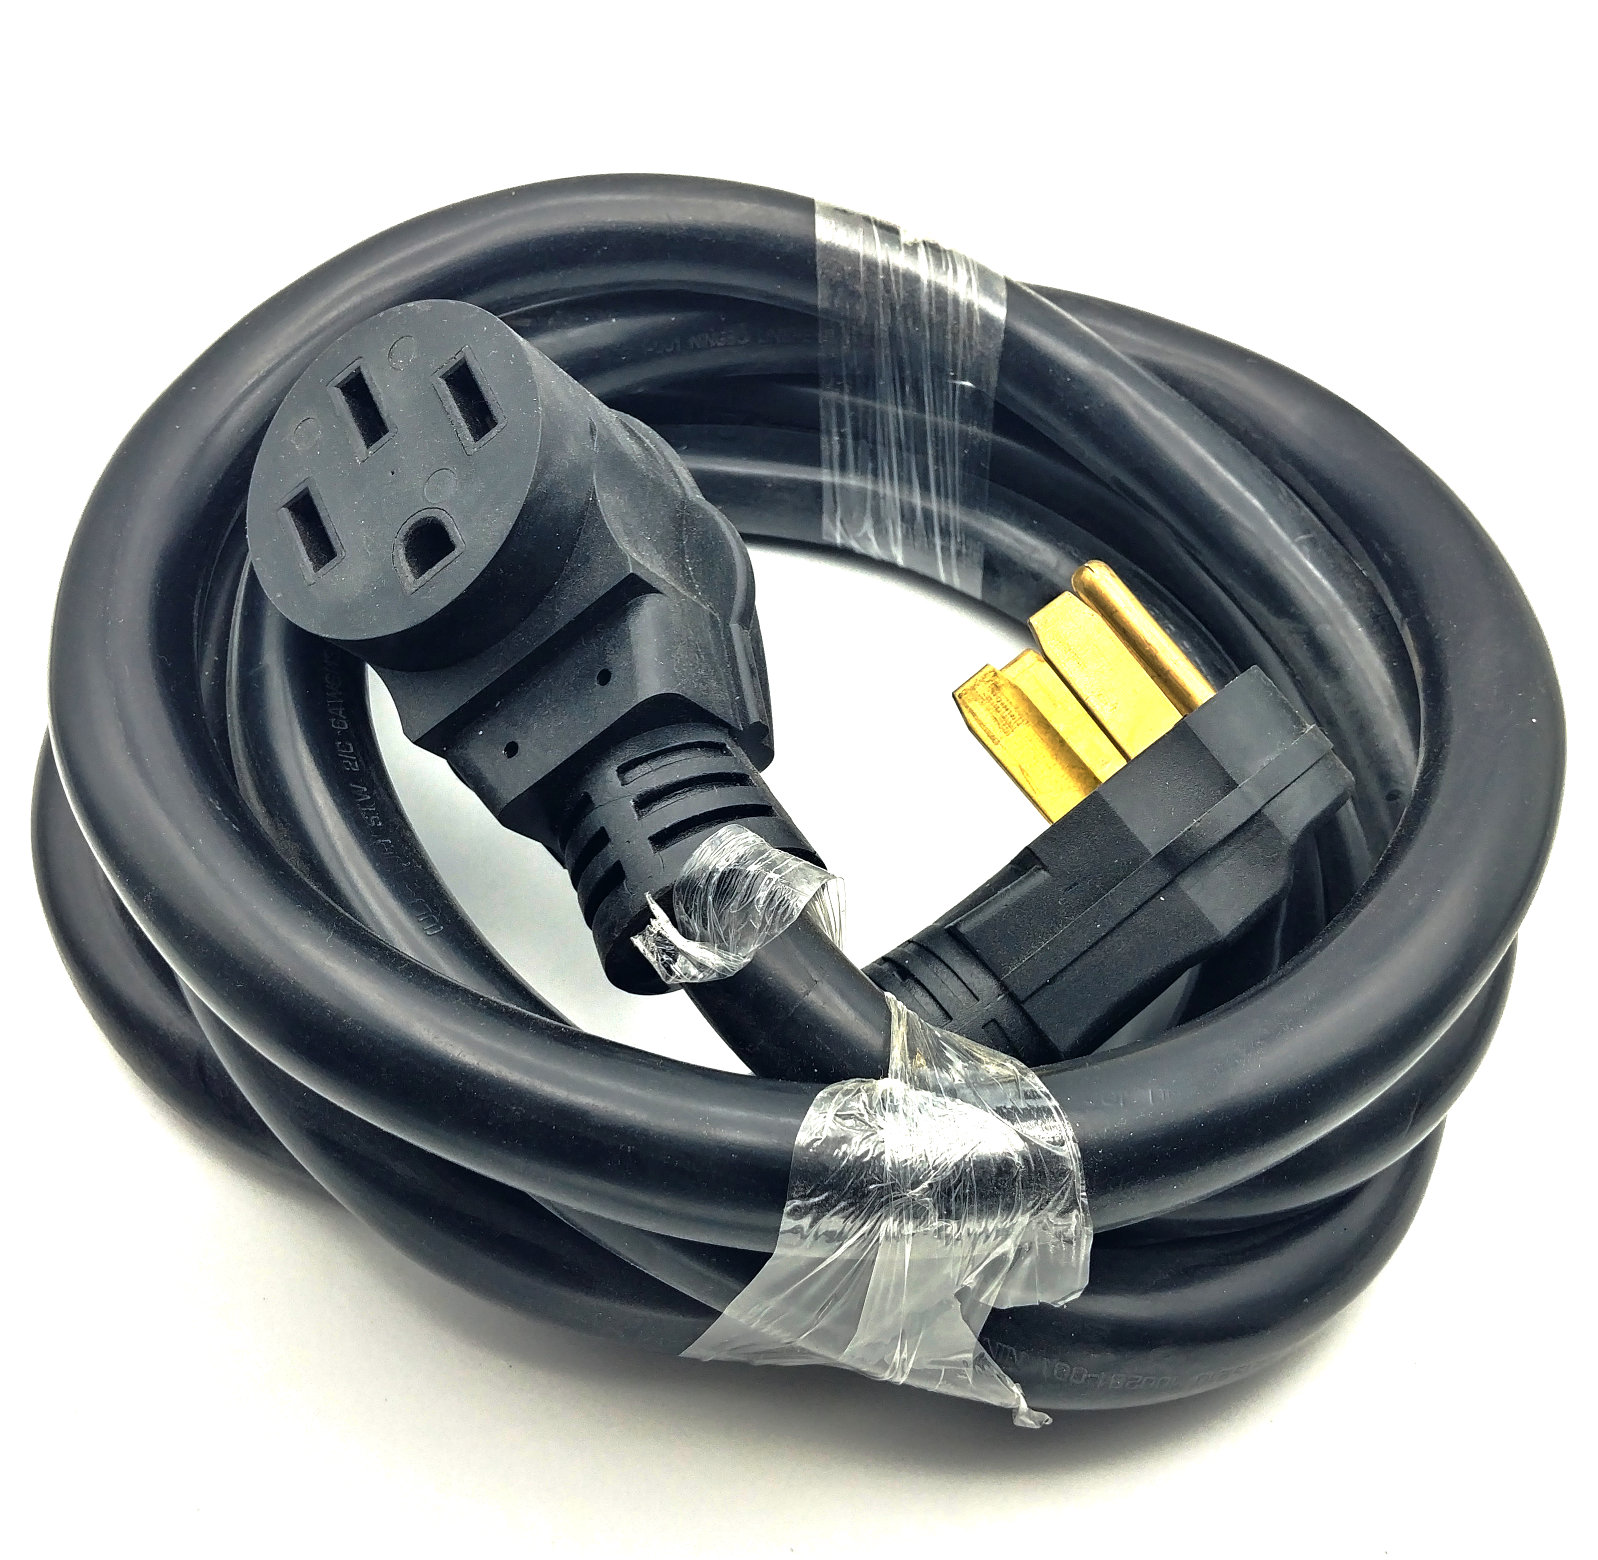 Nema 14 50 Extension Cord For Ev Only 10 Ft Evse Adapters